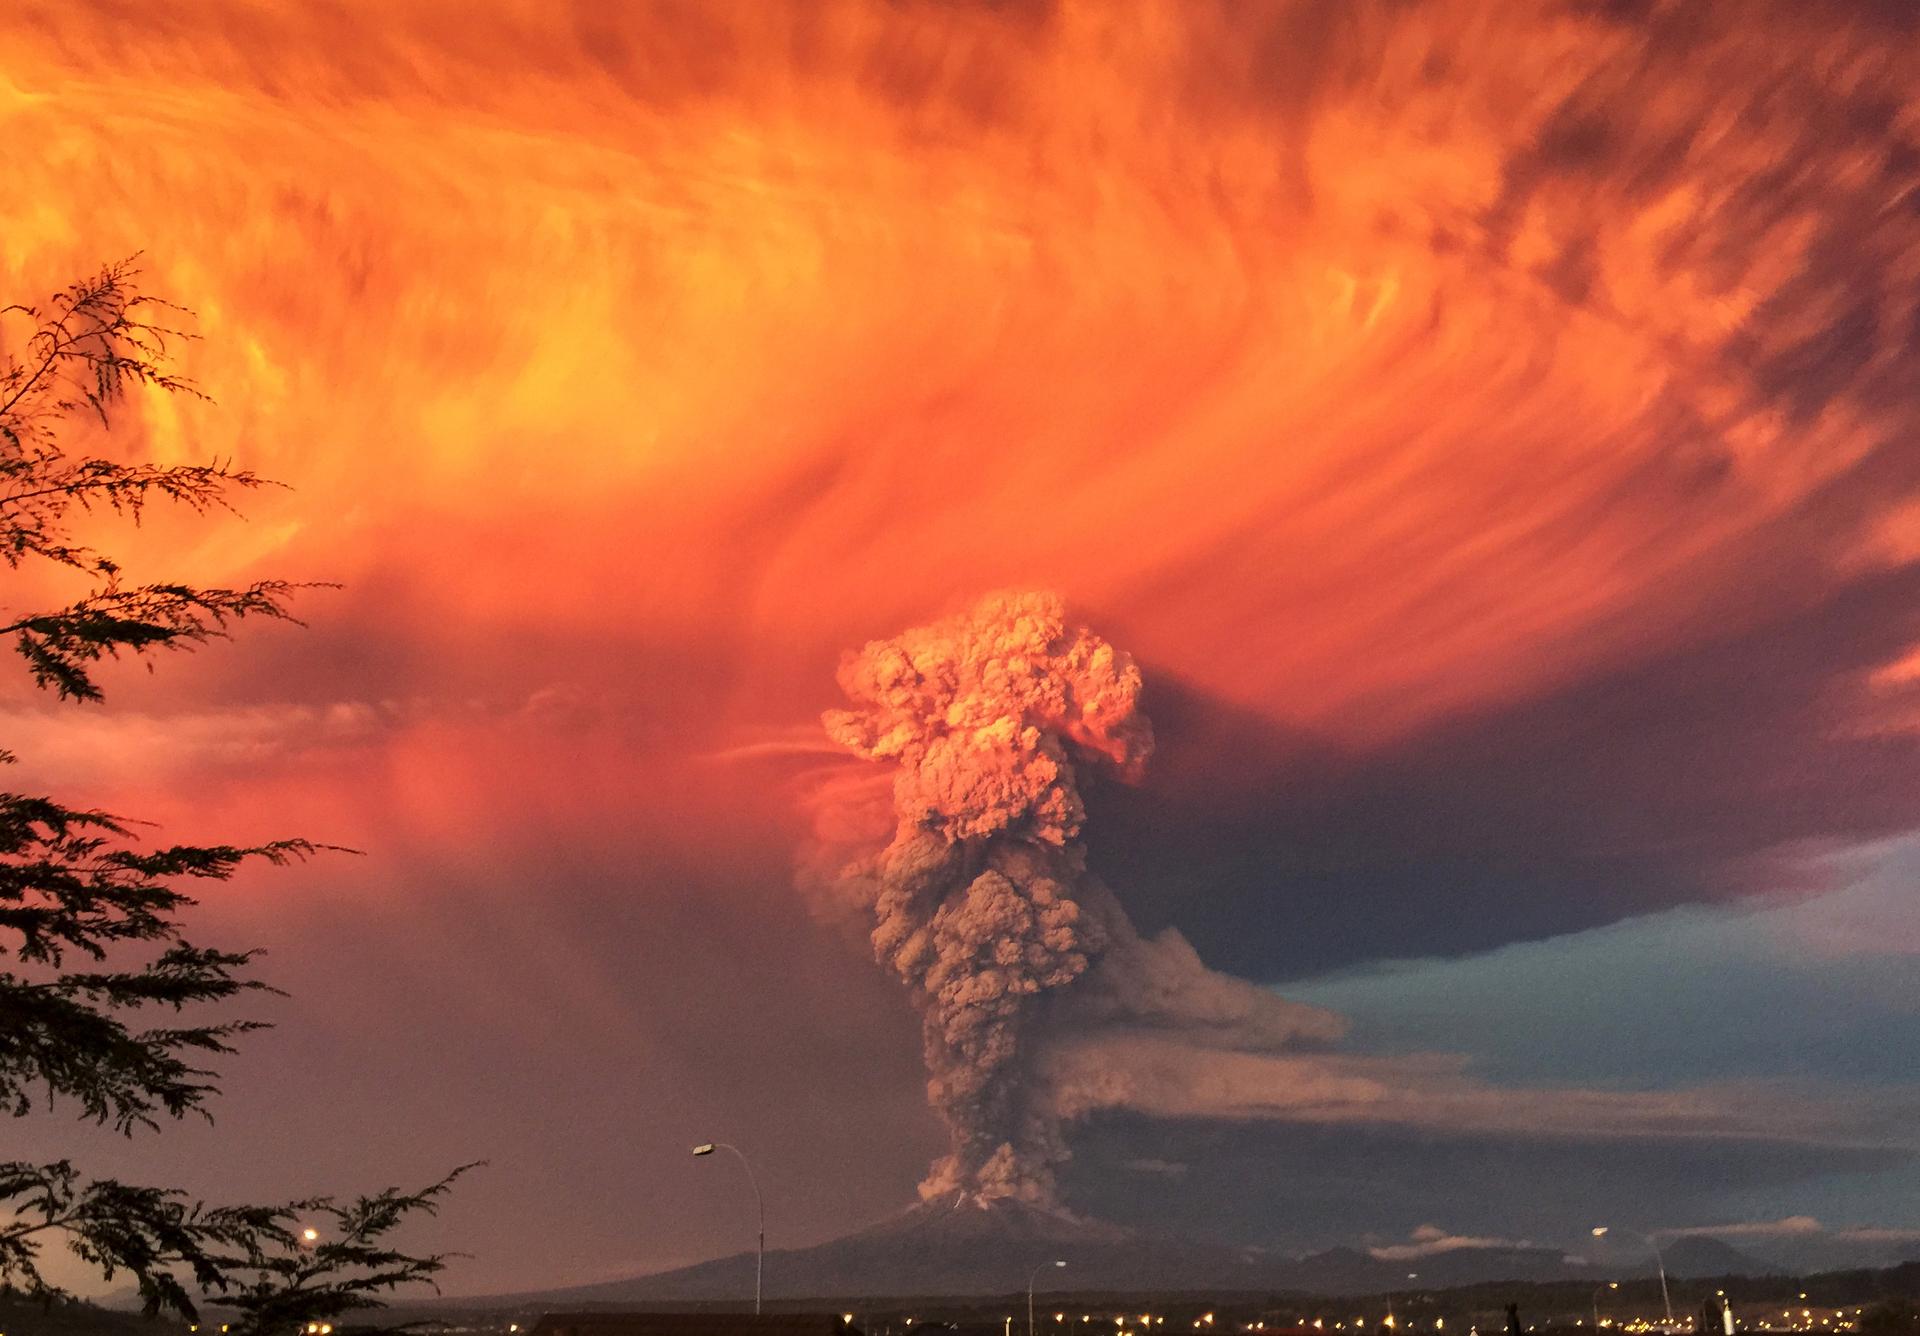 Smoke and ash rise from the Calbuco volcano as seen from the city of Puerto Montt, April 22, 2015. The Calbuco volcano in southern Chile erupted for the first time in more than five decades on Wednesday, sending a thick plume of ash and smoke several kilo